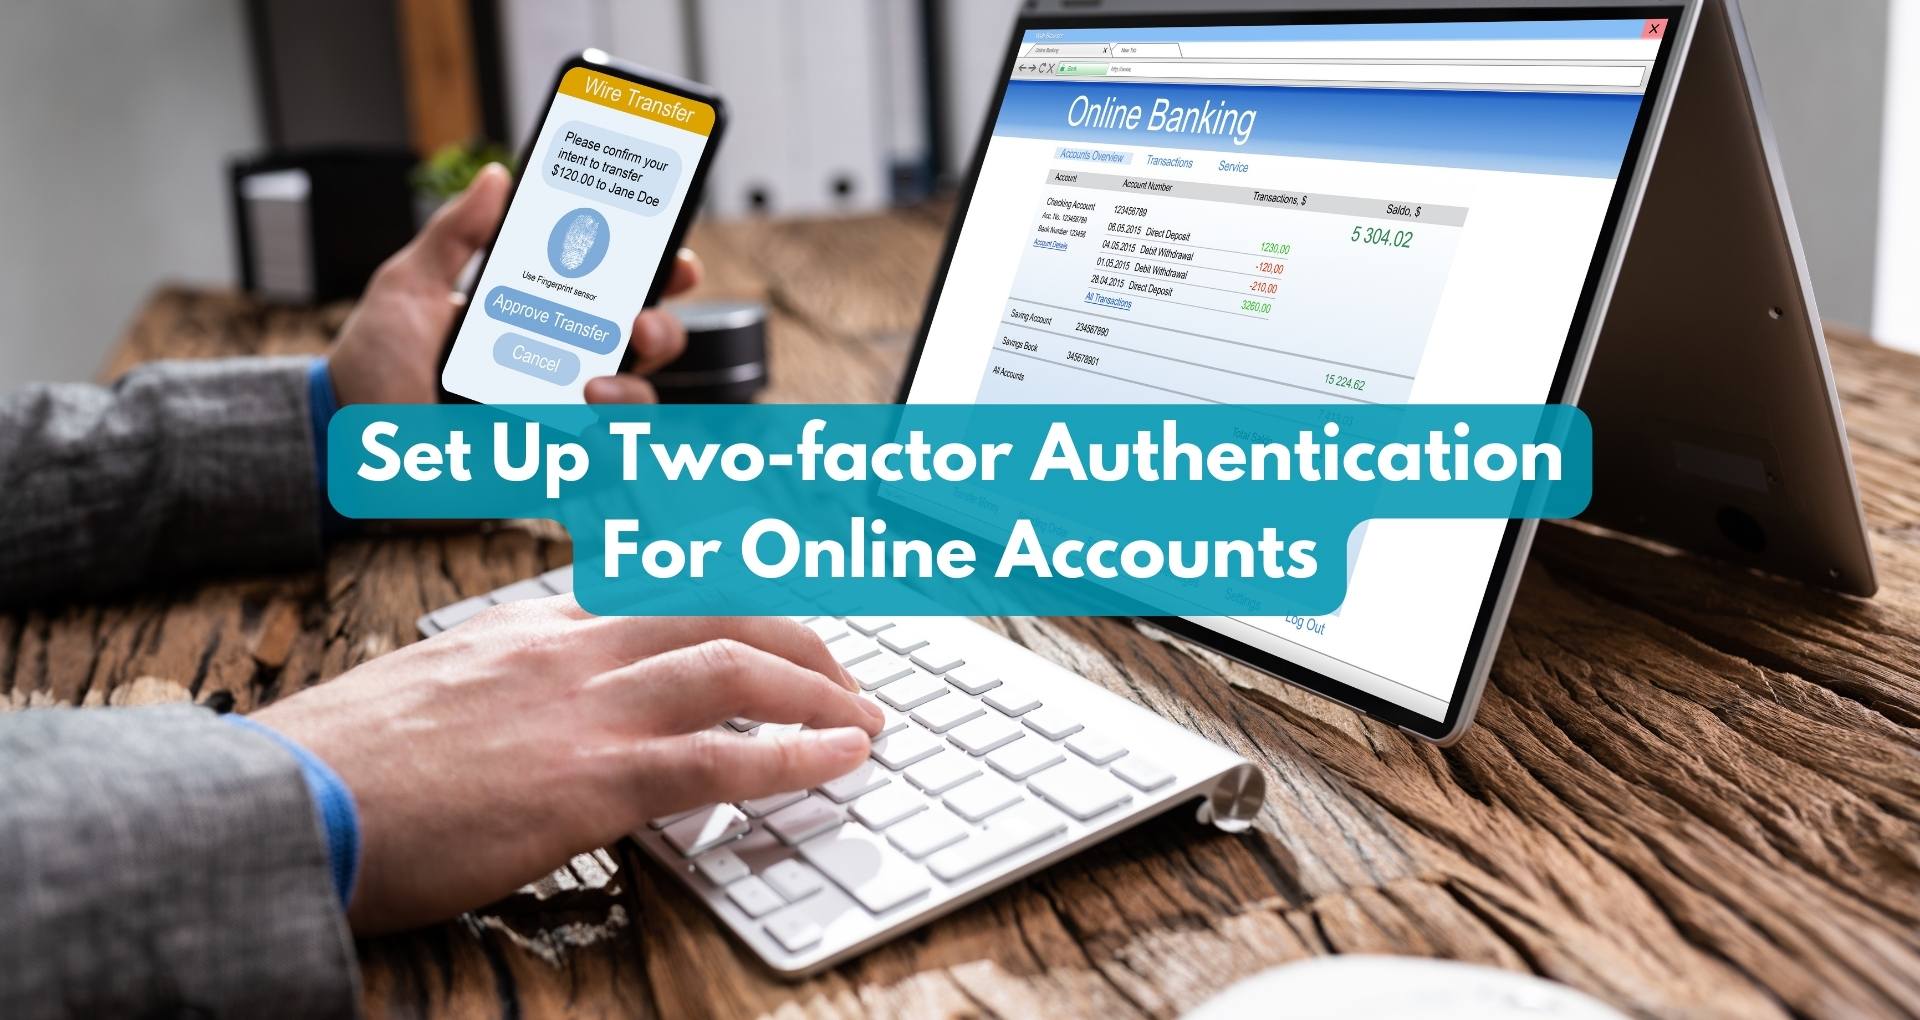 How To Set Up Two-factor Authentication For Online Accounts?